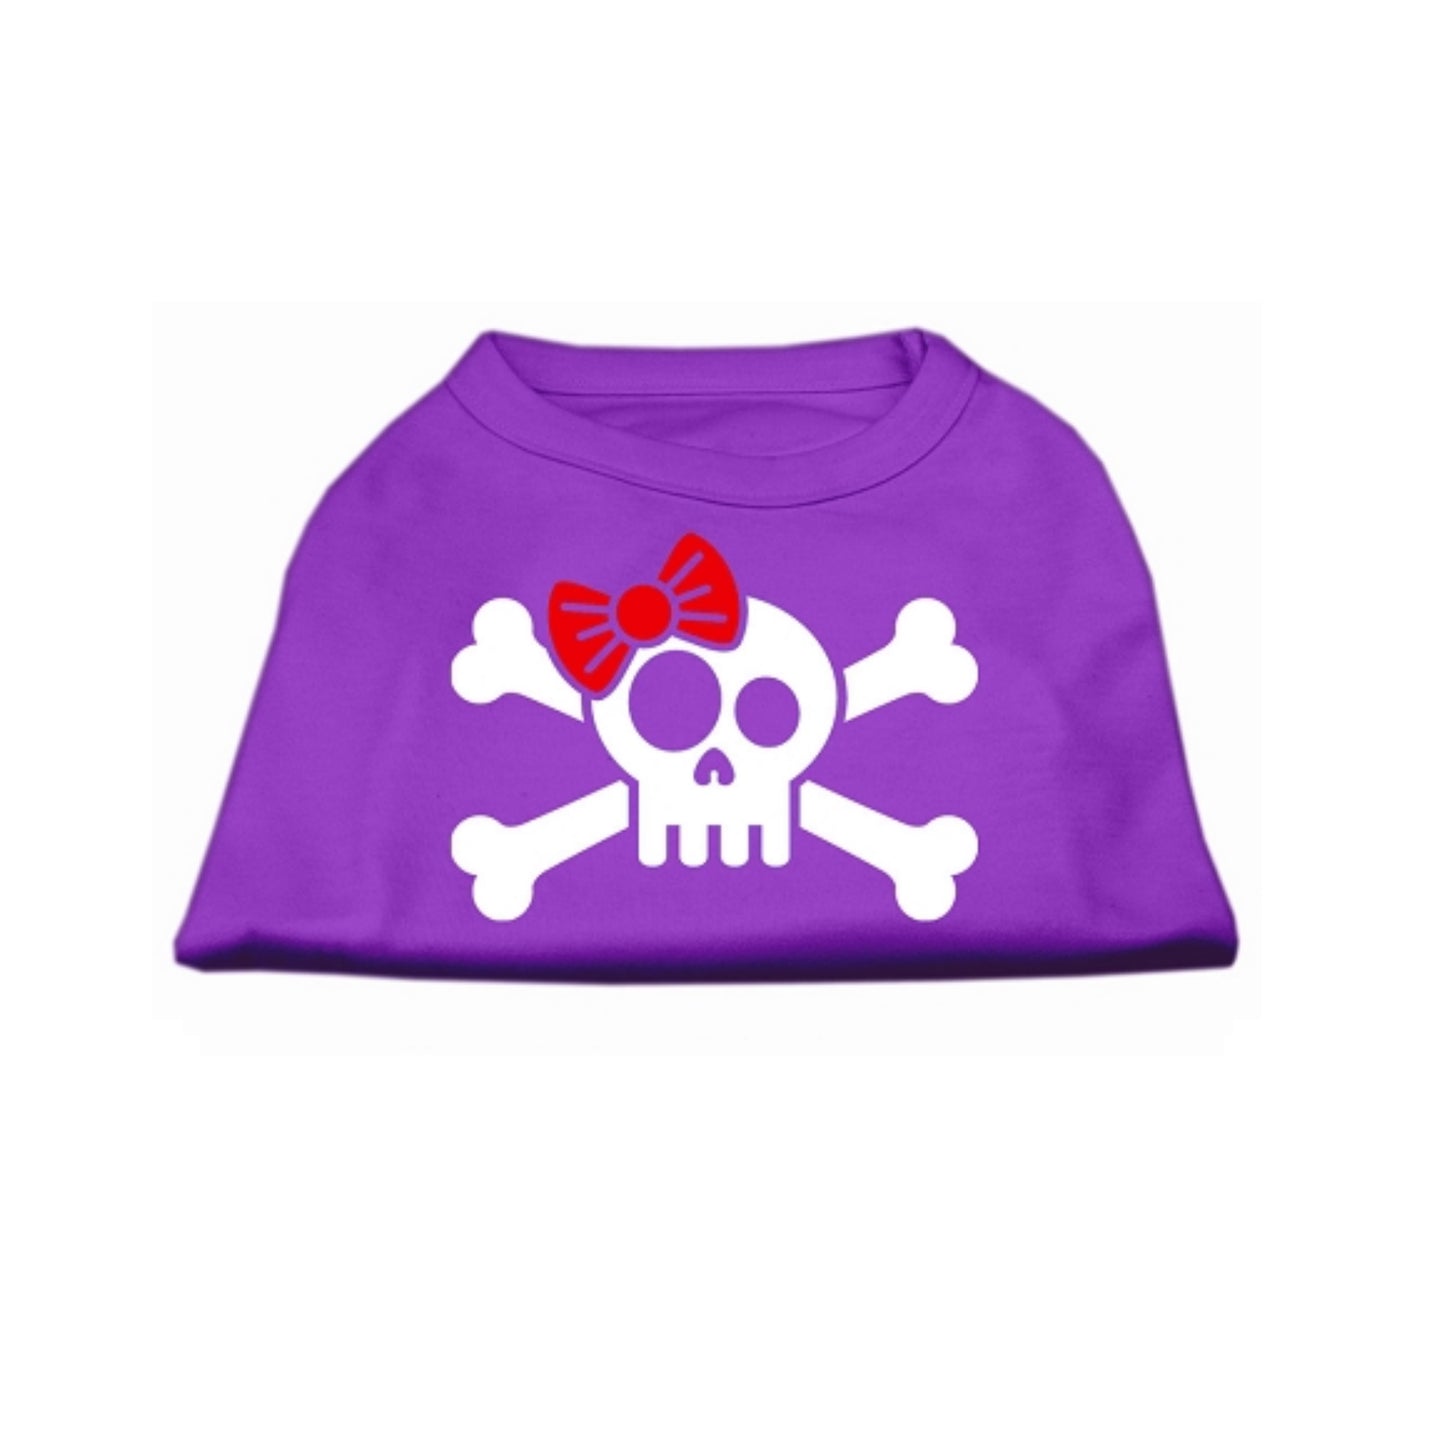 Skull And Cross Bones With A Bow Pet Shirt